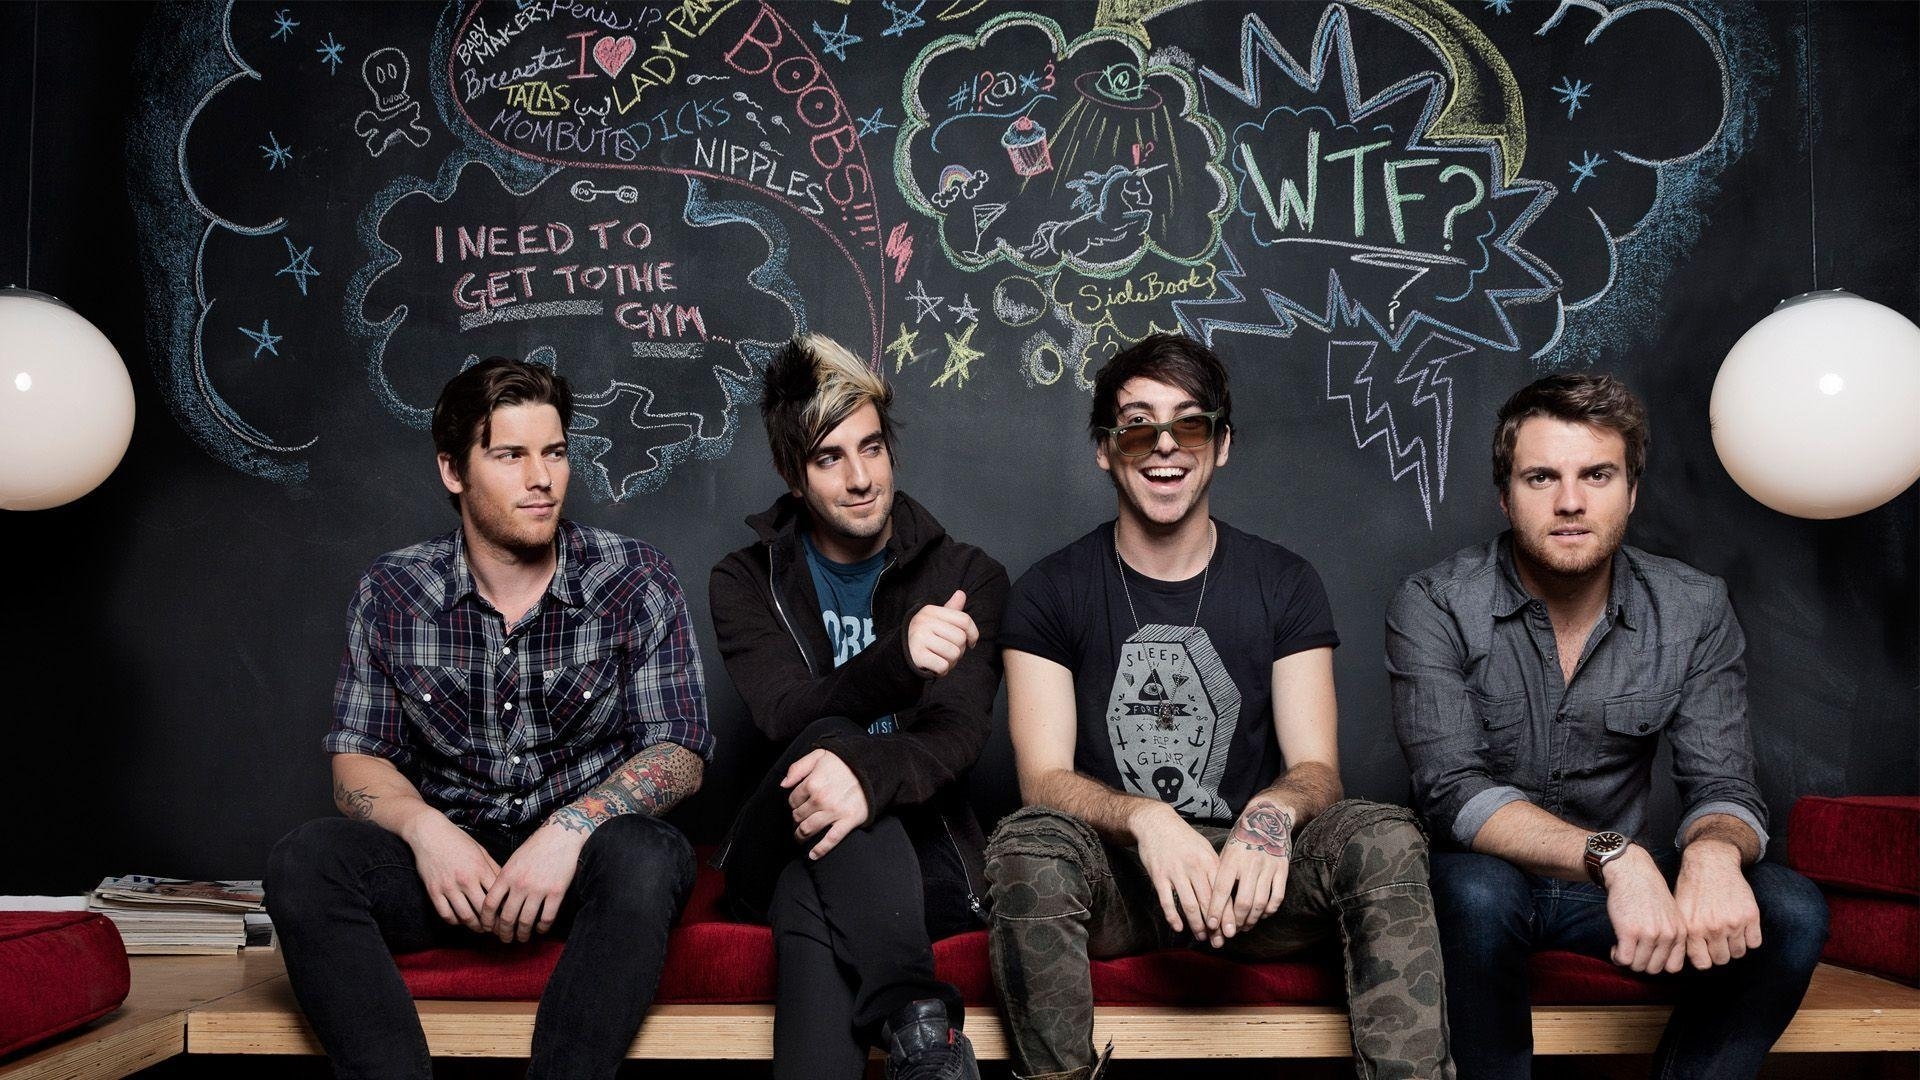 10 Top All Time Low Wallpaper FULL HD 1920×1080 For PC Background